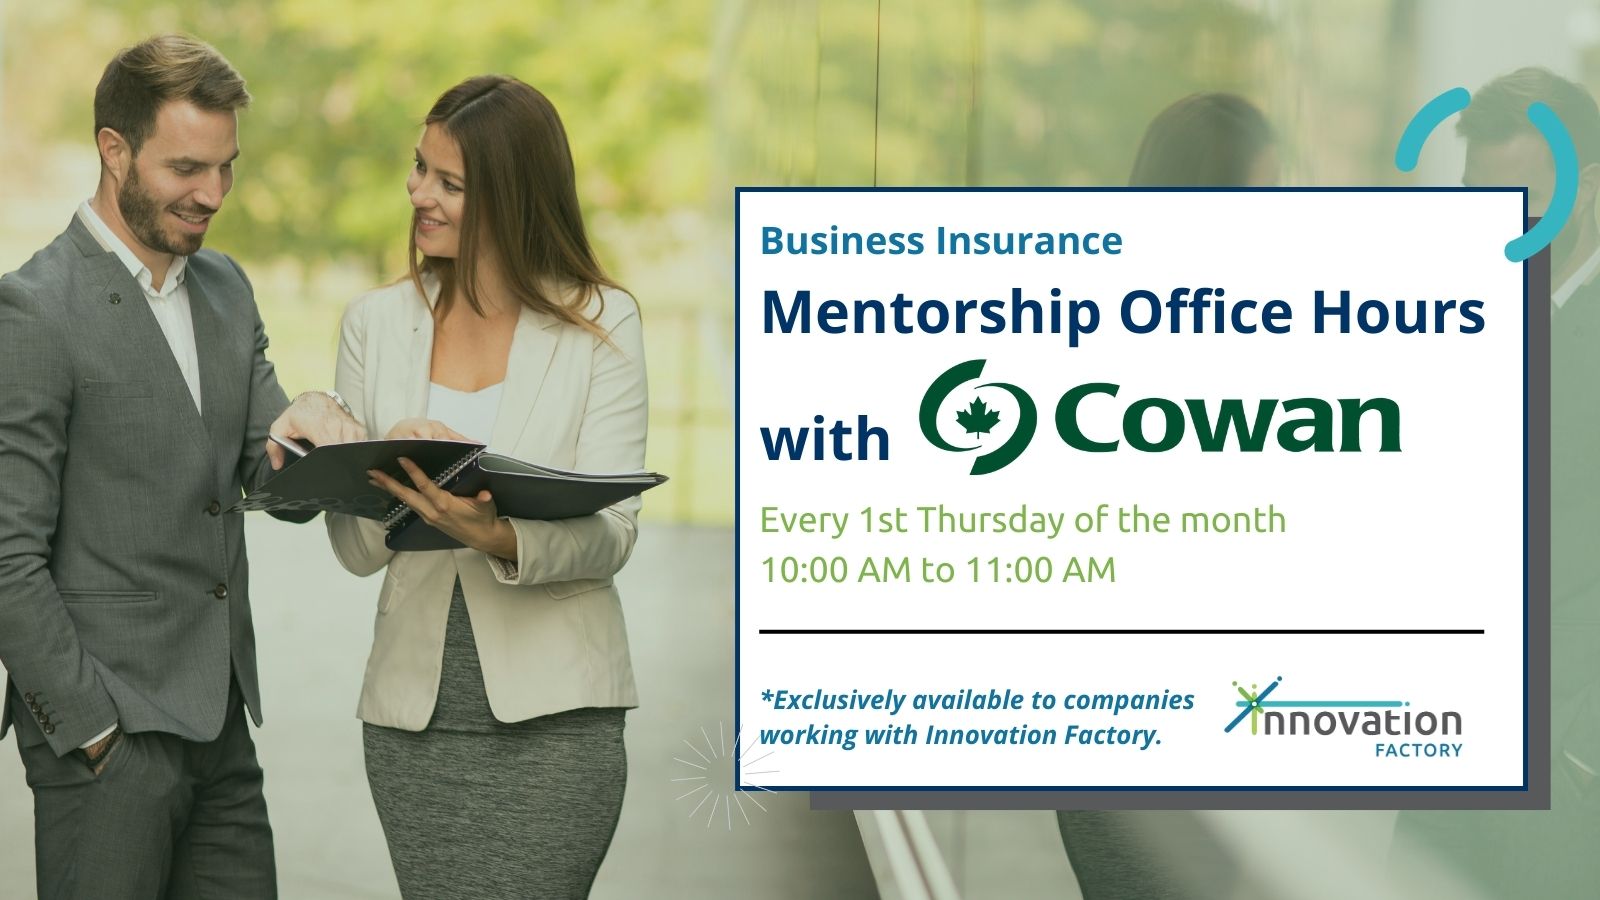 Business Insurance Mentorship Office Hours with Cowan. Takes place every first Thursday of the month from 10:00am to 11:00am